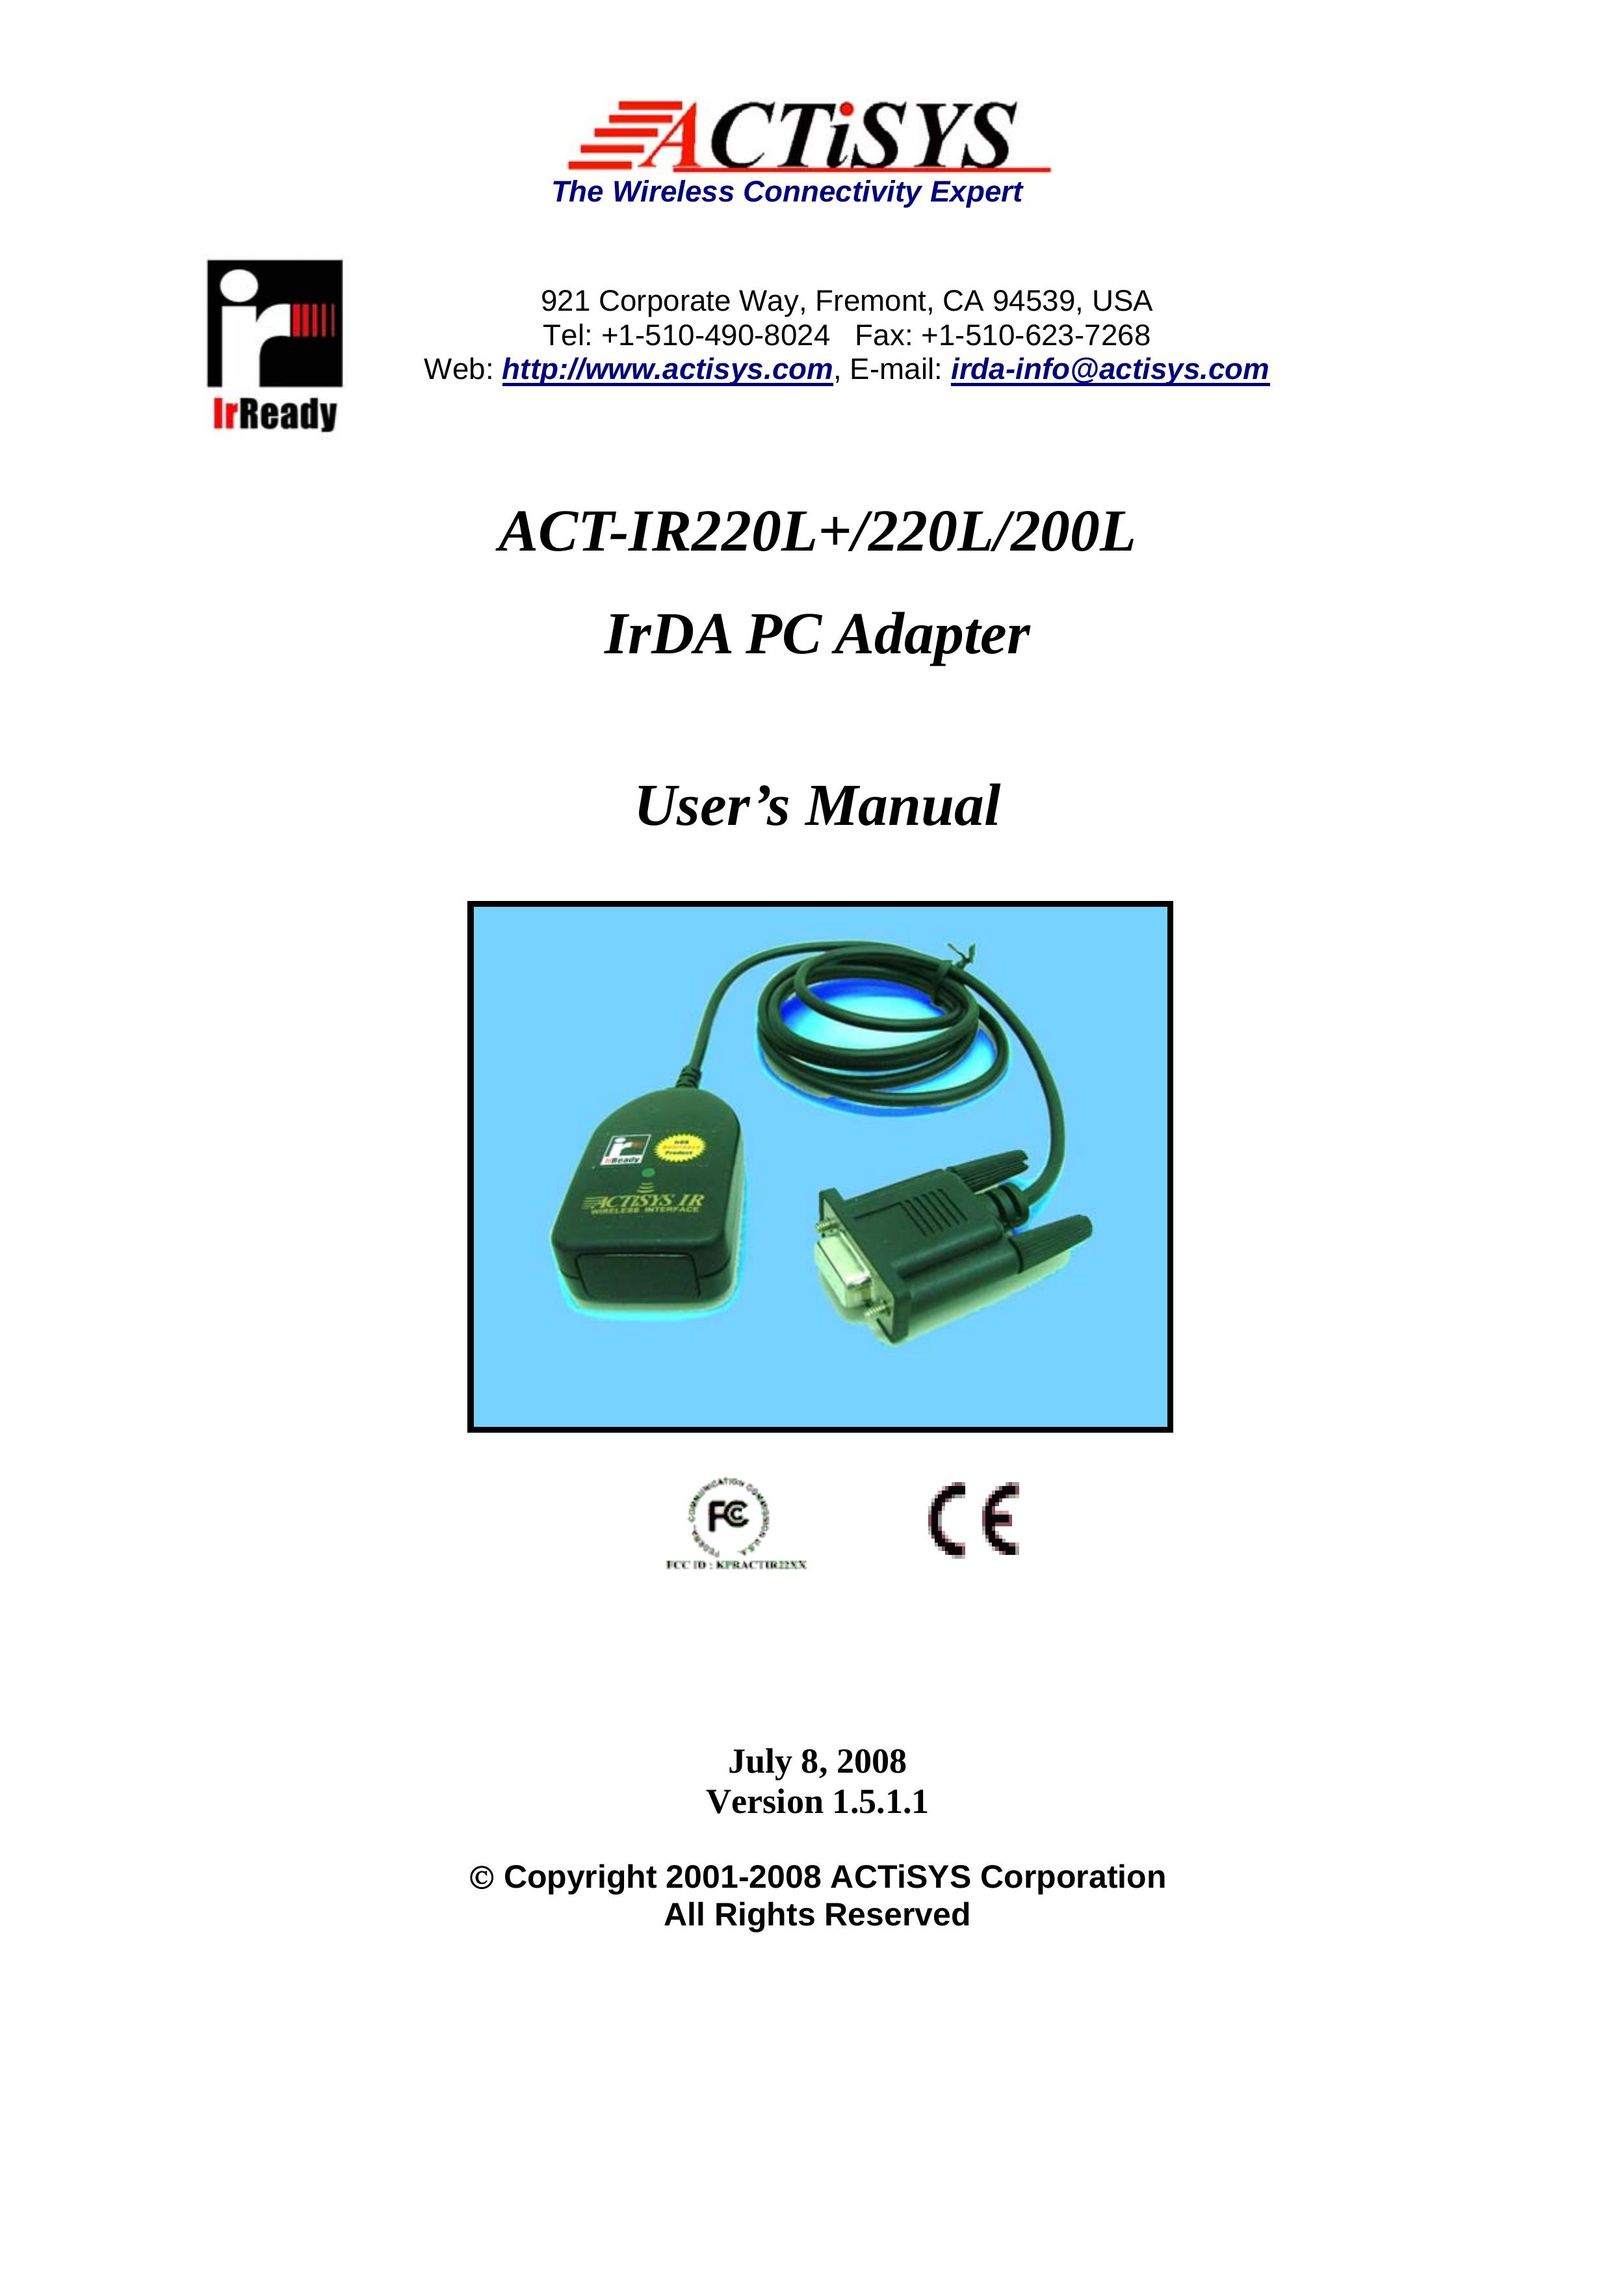 ACTiSYS ACT-IR220L+/220L/200L Network Card User Manual (Page 1)